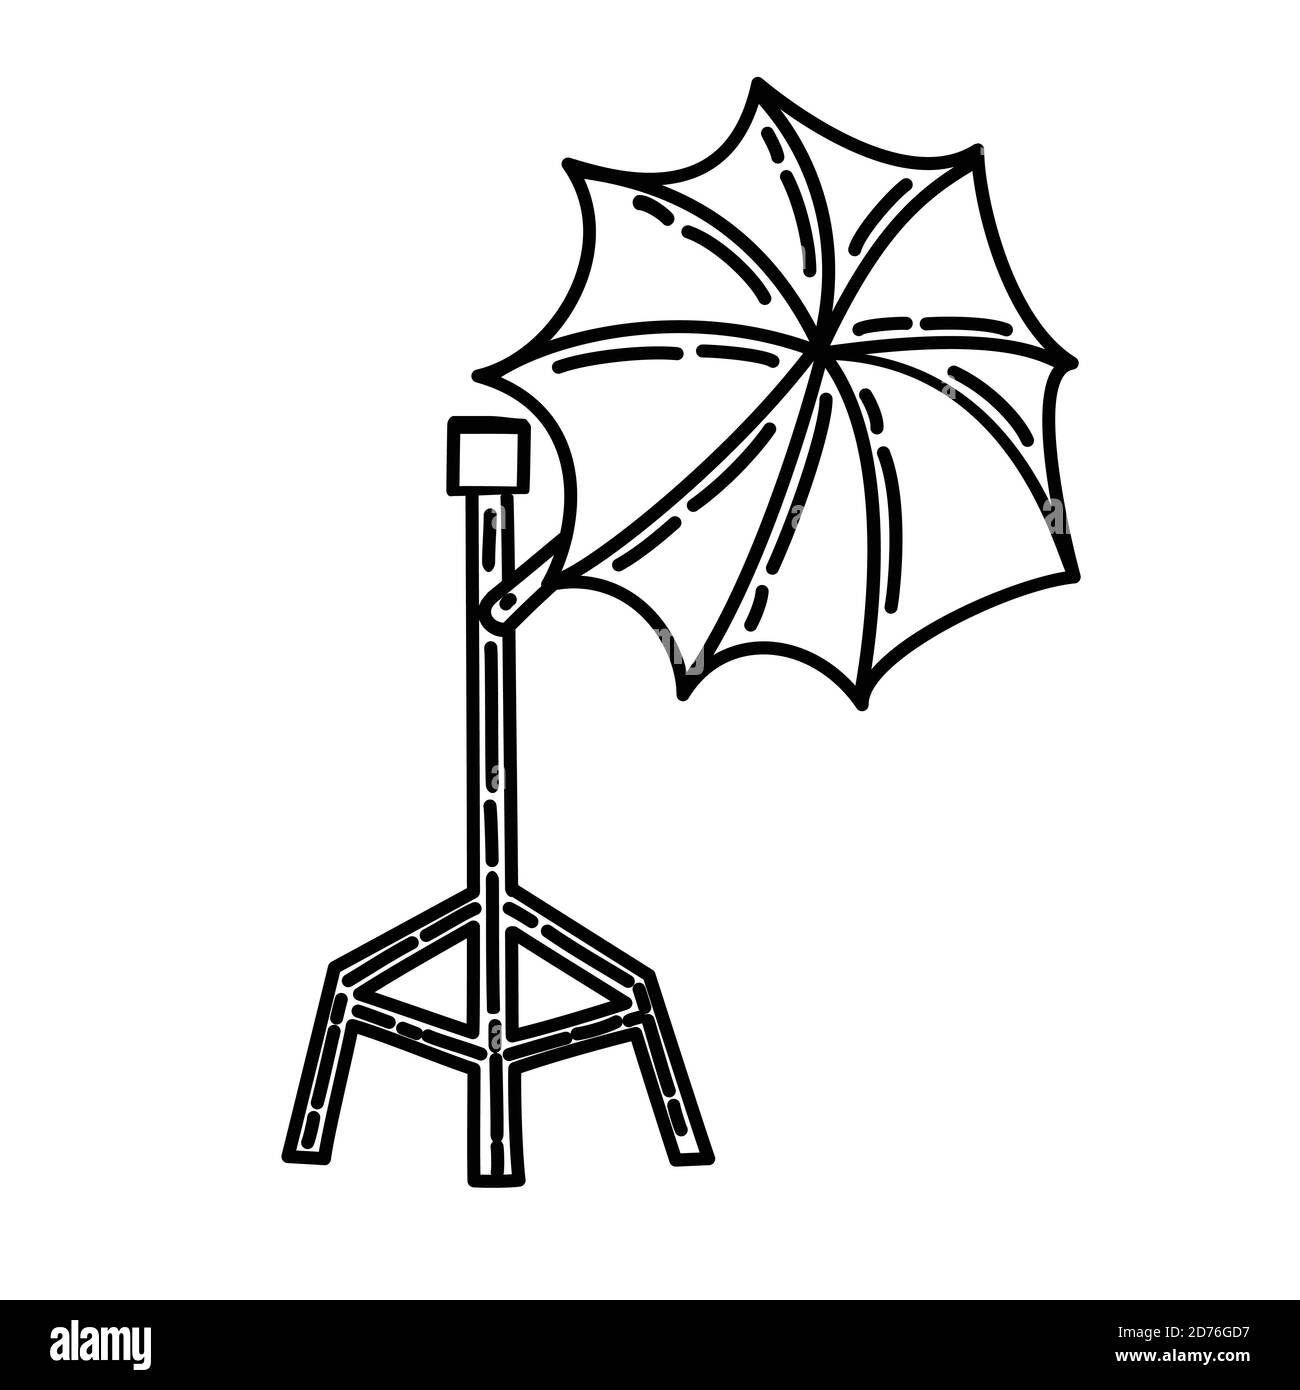 Umbrella Icon. Doodle Hand Drawn or Black Outline Icon Style Stock Vector